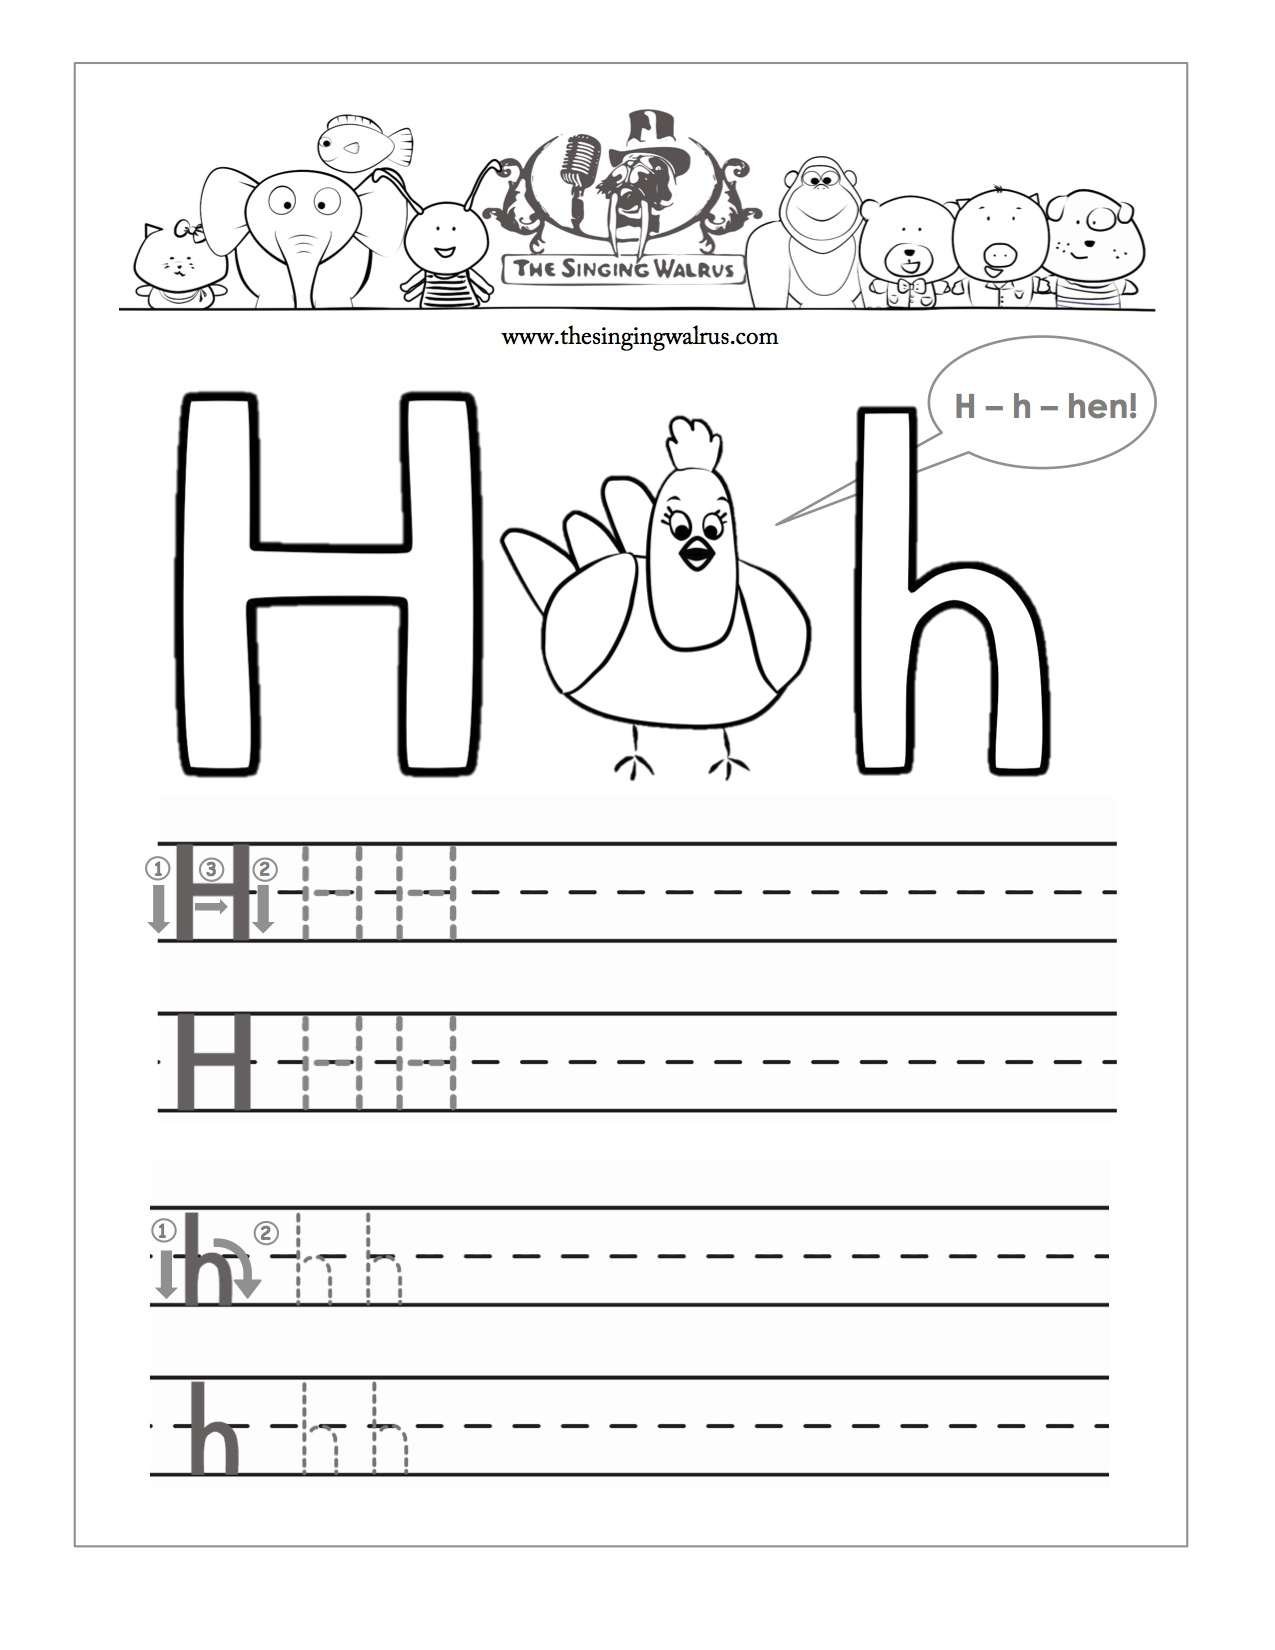 circle-the-matching-lowercase-letter-in-each-row-from-a-to-h-worksheet-letters-a-h-worksheet